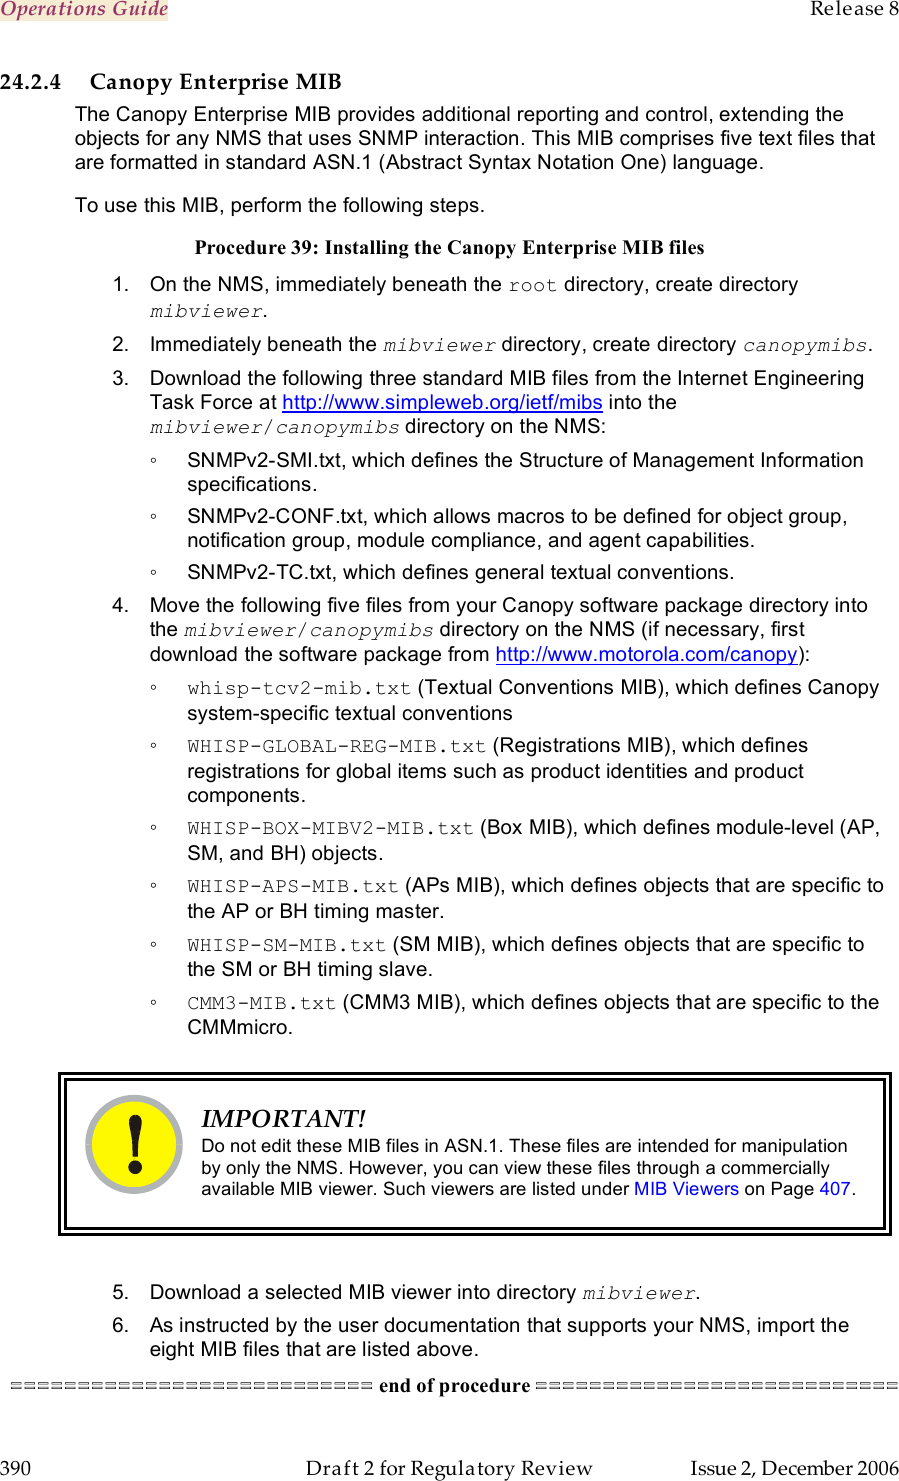 Operations Guide    Release 8   390  Draft 2 for Regulatory Review  Issue 2, December 2006 24.2.4 Canopy Enterprise MIB The Canopy Enterprise MIB provides additional reporting and control, extending the objects for any NMS that uses SNMP interaction. This MIB comprises five text files that are formatted in standard ASN.1 (Abstract Syntax Notation One) language. To use this MIB, perform the following steps. Procedure 39: Installing the Canopy Enterprise MIB files 1.  On the NMS, immediately beneath the root directory, create directory mibviewer. 2.  Immediately beneath the mibviewer directory, create directory canopymibs. 3.  Download the following three standard MIB files from the Internet Engineering Task Force at http://www.simpleweb.org/ietf/mibs into the mibviewer/canopymibs directory on the NMS:  ◦  SNMPv2-SMI.txt, which defines the Structure of Management Information specifications. ◦  SNMPv2-CONF.txt, which allows macros to be defined for object group, notification group, module compliance, and agent capabilities. ◦  SNMPv2-TC.txt, which defines general textual conventions. 4.  Move the following five files from your Canopy software package directory into the mibviewer/canopymibs directory on the NMS (if necessary, first download the software package from http://www.motorola.com/canopy): ◦ whisp-tcv2-mib.txt (Textual Conventions MIB), which defines Canopy system-specific textual conventions ◦ WHISP-GLOBAL-REG-MIB.txt (Registrations MIB), which defines registrations for global items such as product identities and product components. ◦ WHISP-BOX-MIBV2-MIB.txt (Box MIB), which defines module-level (AP, SM, and BH) objects. ◦ WHISP-APS-MIB.txt (APs MIB), which defines objects that are specific to the AP or BH timing master. ◦ WHISP-SM-MIB.txt (SM MIB), which defines objects that are specific to the SM or BH timing slave. ◦ CMM3-MIB.txt (CMM3 MIB), which defines objects that are specific to the CMMmicro.   IMPORTANT! Do not edit these MIB files in ASN.1. These files are intended for manipulation by only the NMS. However, you can view these files through a commercially available MIB viewer. Such viewers are listed under MIB Viewers on Page 407.  5.  Download a selected MIB viewer into directory mibviewer. 6.  As instructed by the user documentation that supports your NMS, import the eight MIB files that are listed above. =========================== end of procedure =========================== 